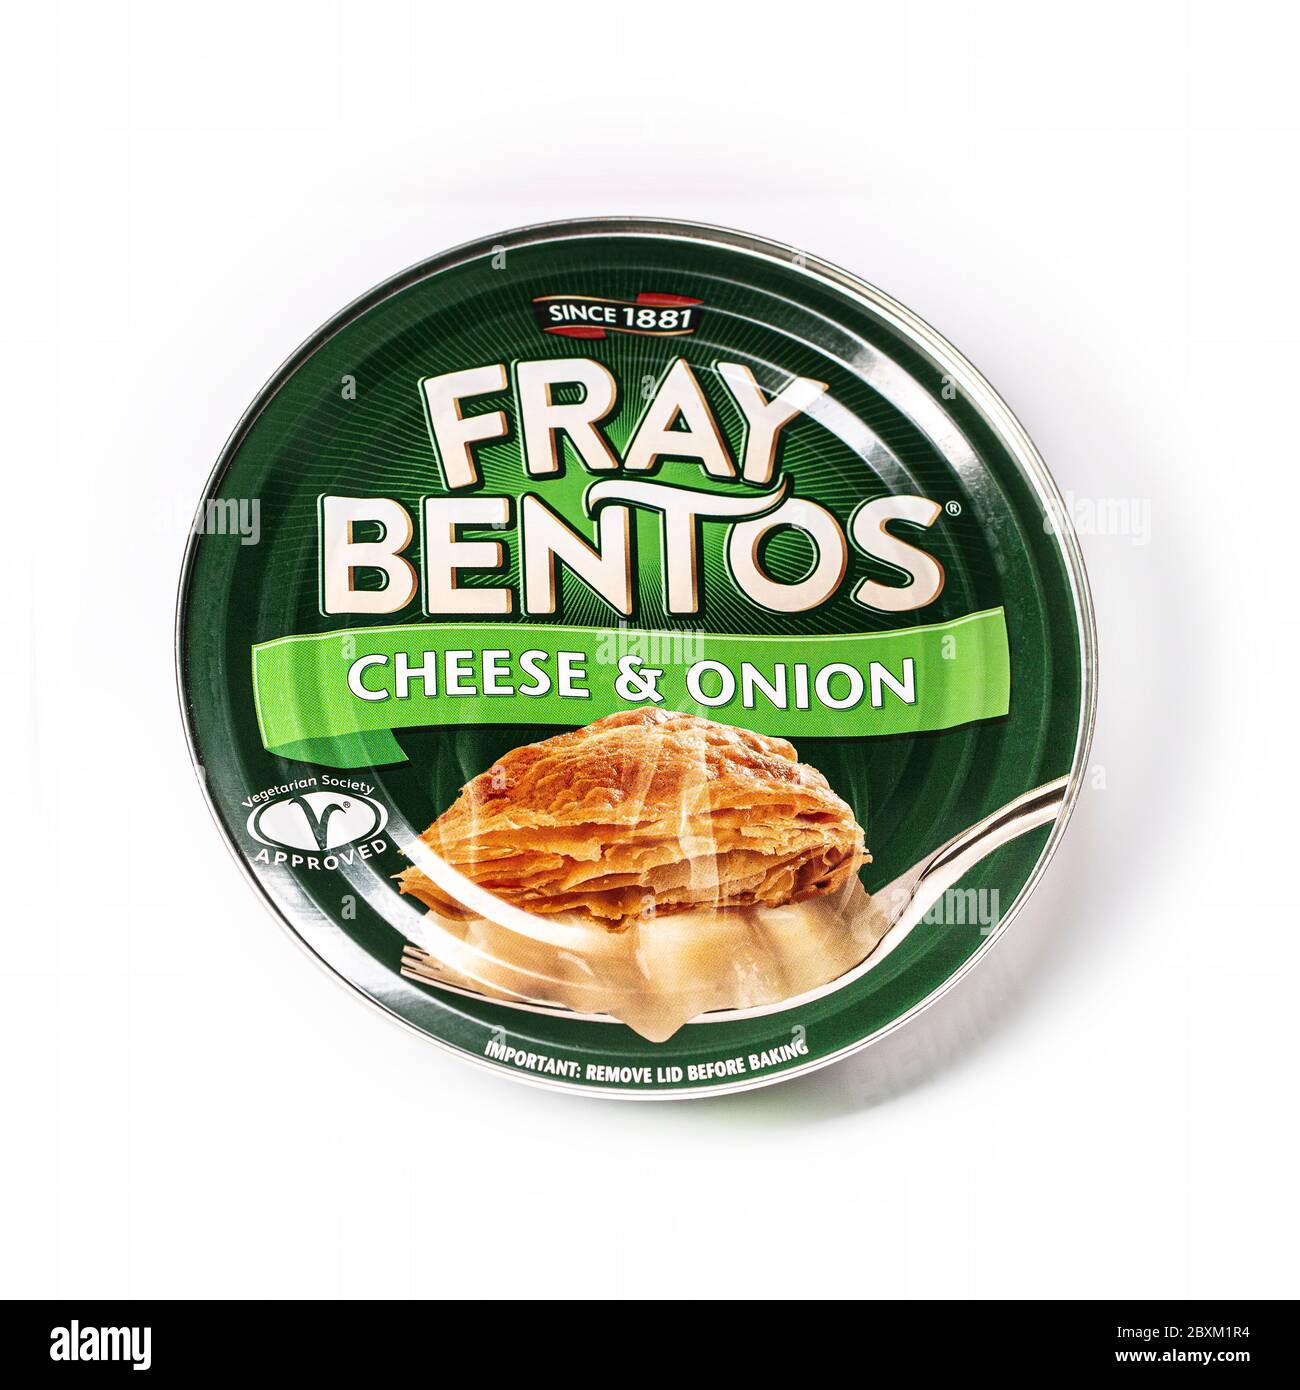 SWINDON, UK - June 7, 2020: Fray Bentos Cheese and Onion pie on a white background Stock Photo